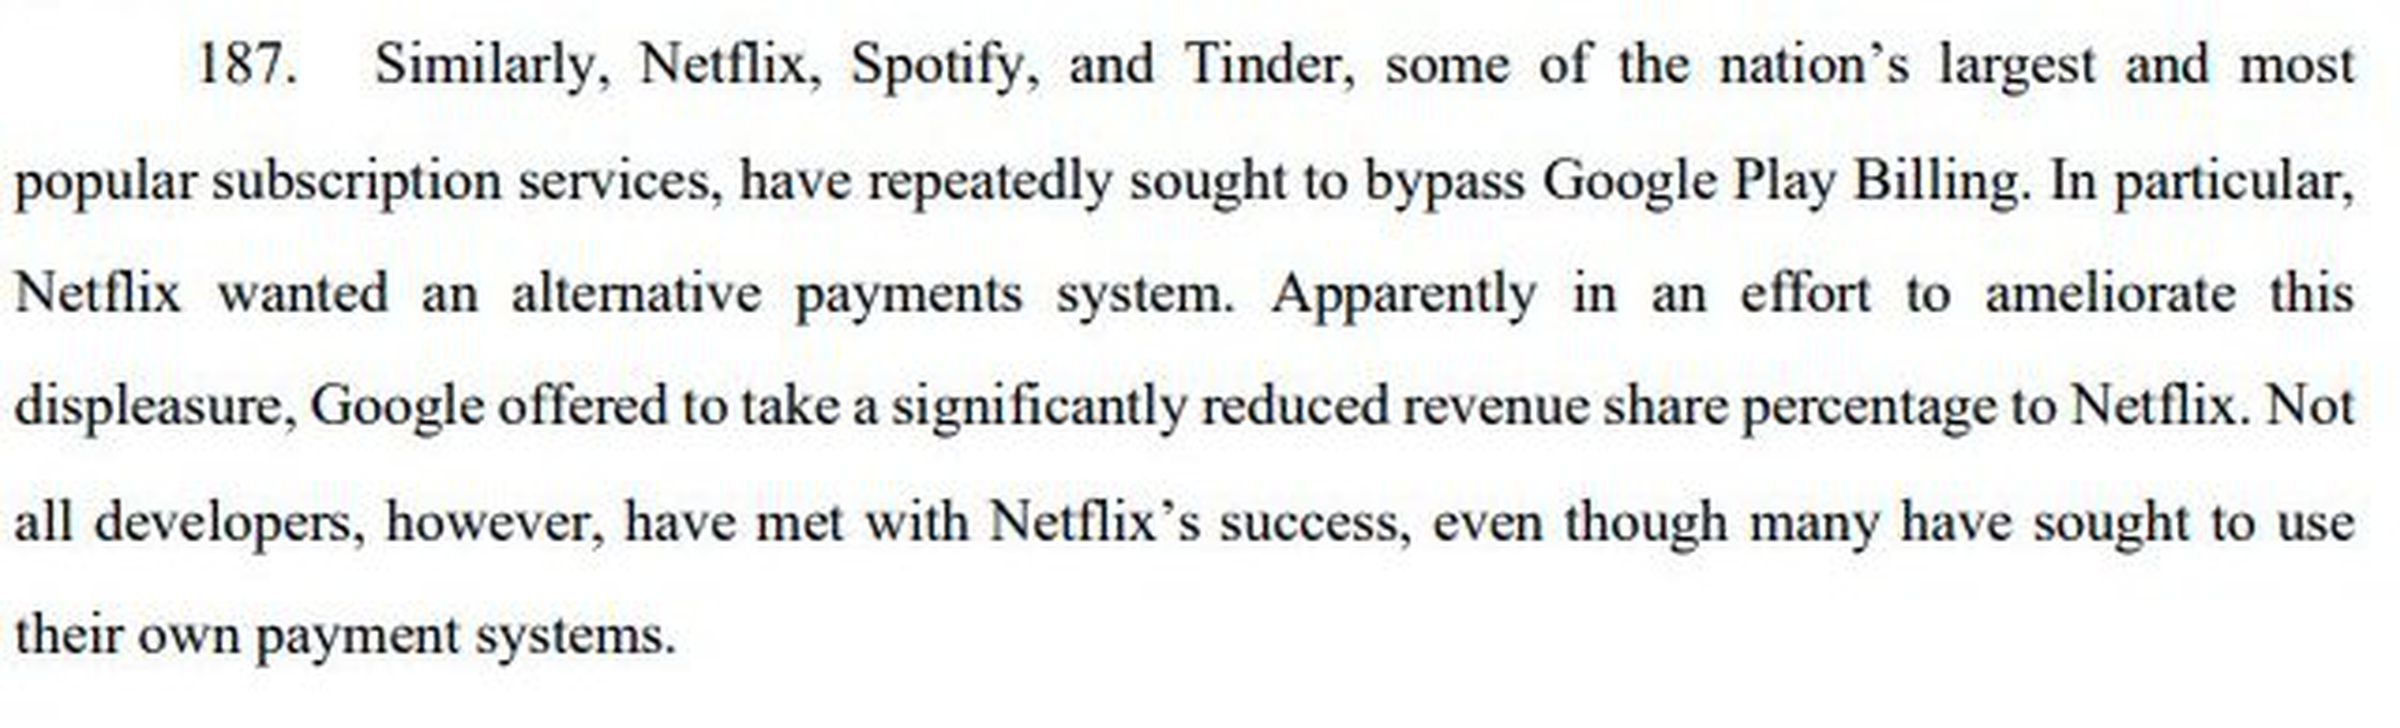 “Similarly, Netflix, Spotify, and Tinder, some of the nation’s largest and most popular subscription services, have repeatedly sought to bypass Google Play Billing. In particular, Netflix wanted an alternative payments system. Apparently in an effort to ameliorate this displeasure, Google offered to take a significantly reduced revenue share percentage to Netflix. Not all developers, however, have met with Netflix’s success, even though many have sought to use their own payment systems.”